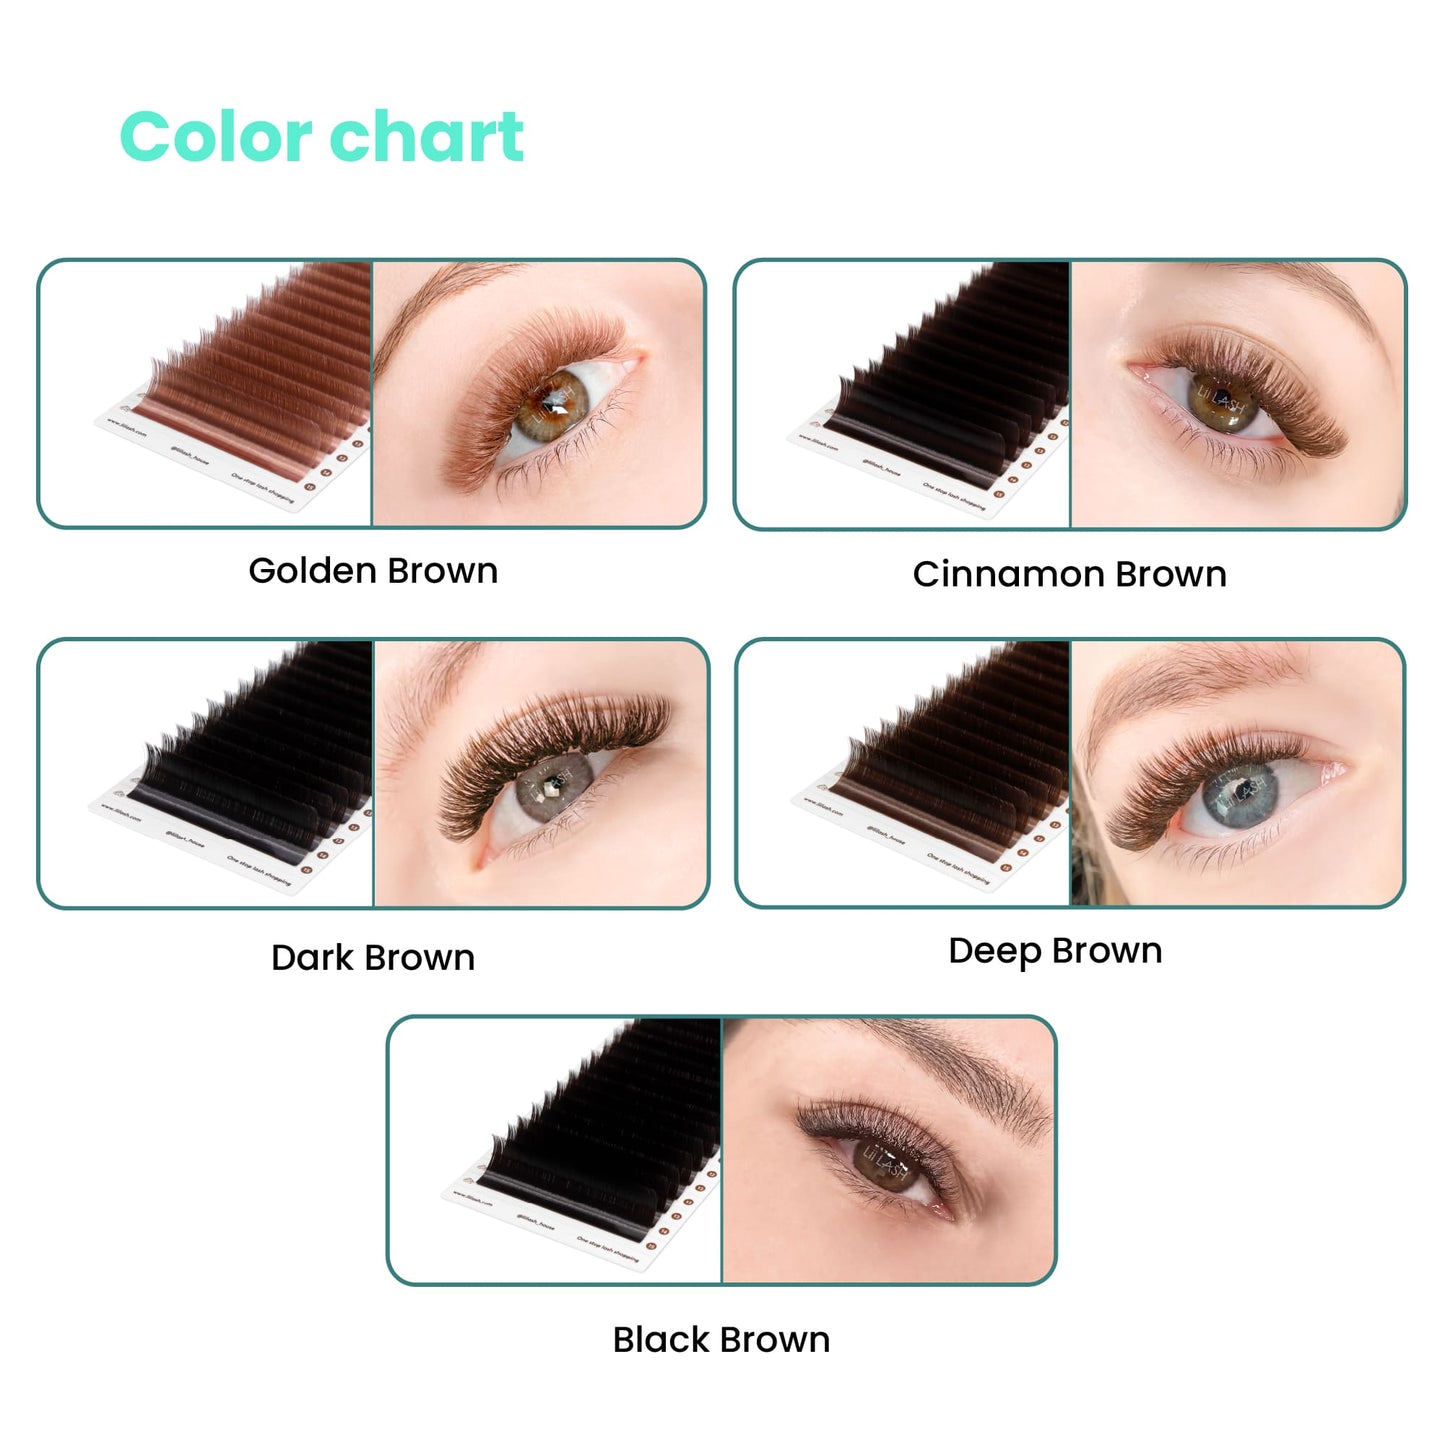 Close-up image highlighting the results of 5 shades of brown: golden cinnamon, dark, deep, and black brown